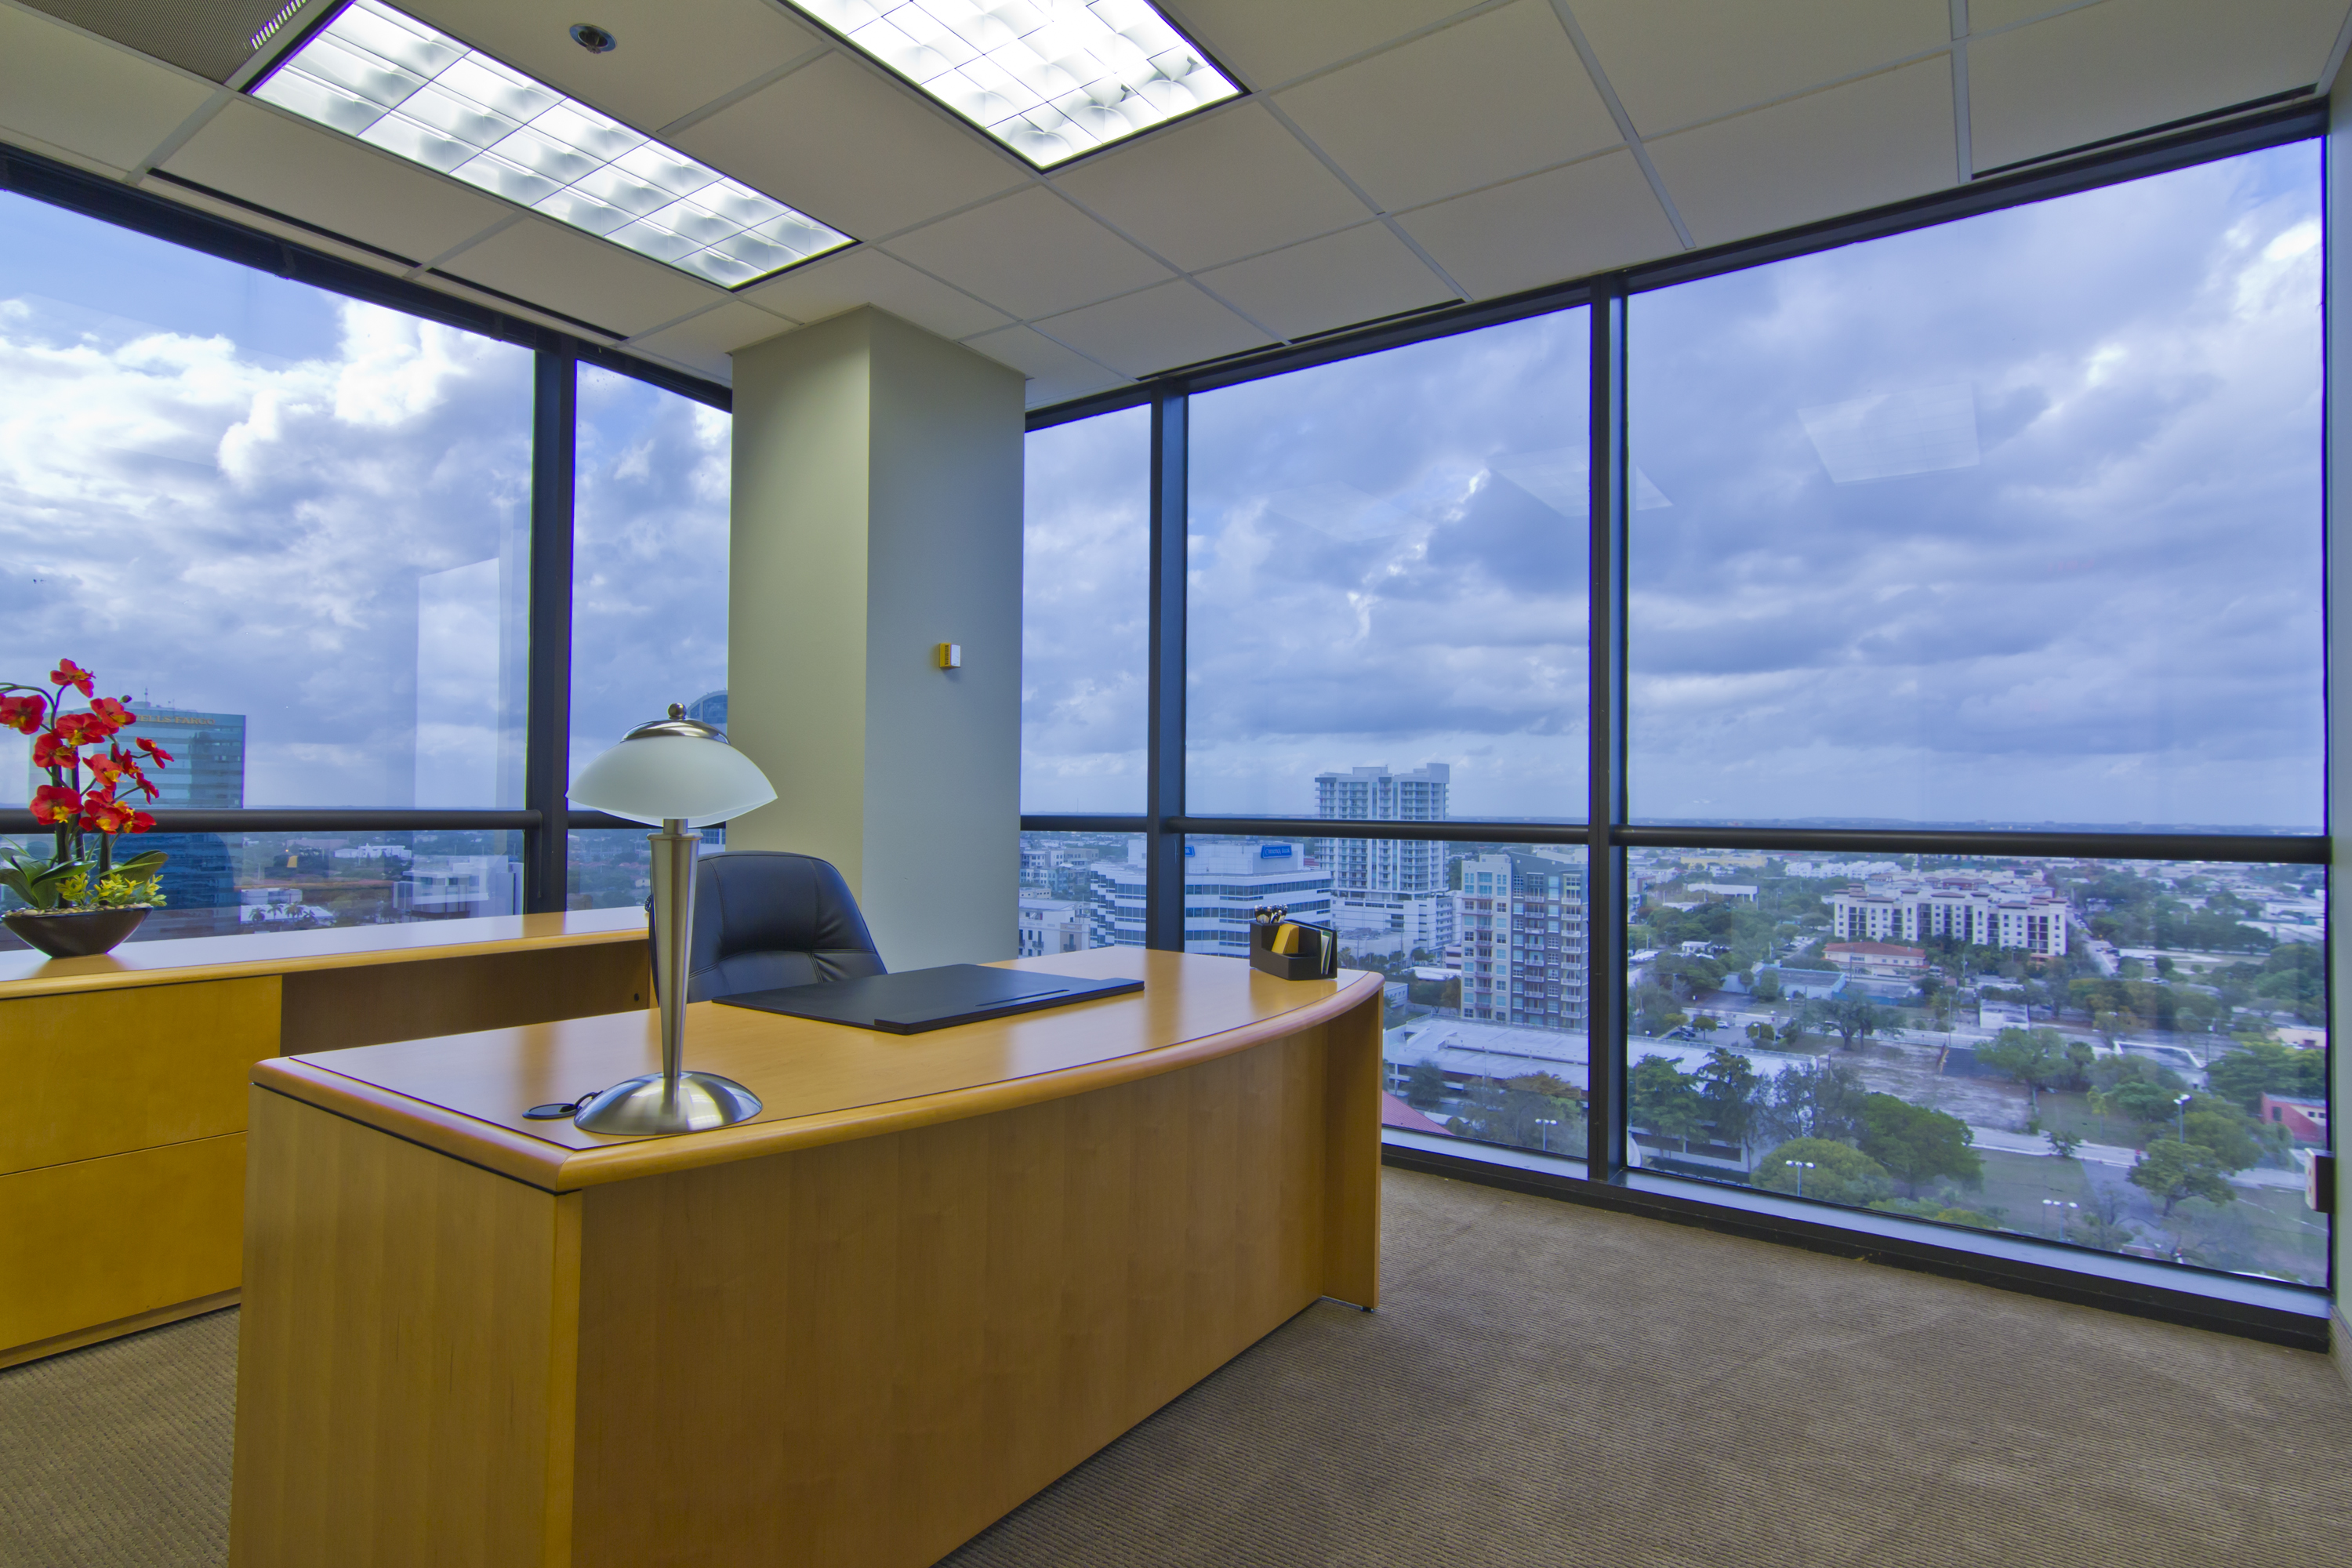 Furnished law offices are available in many sizes and configurations